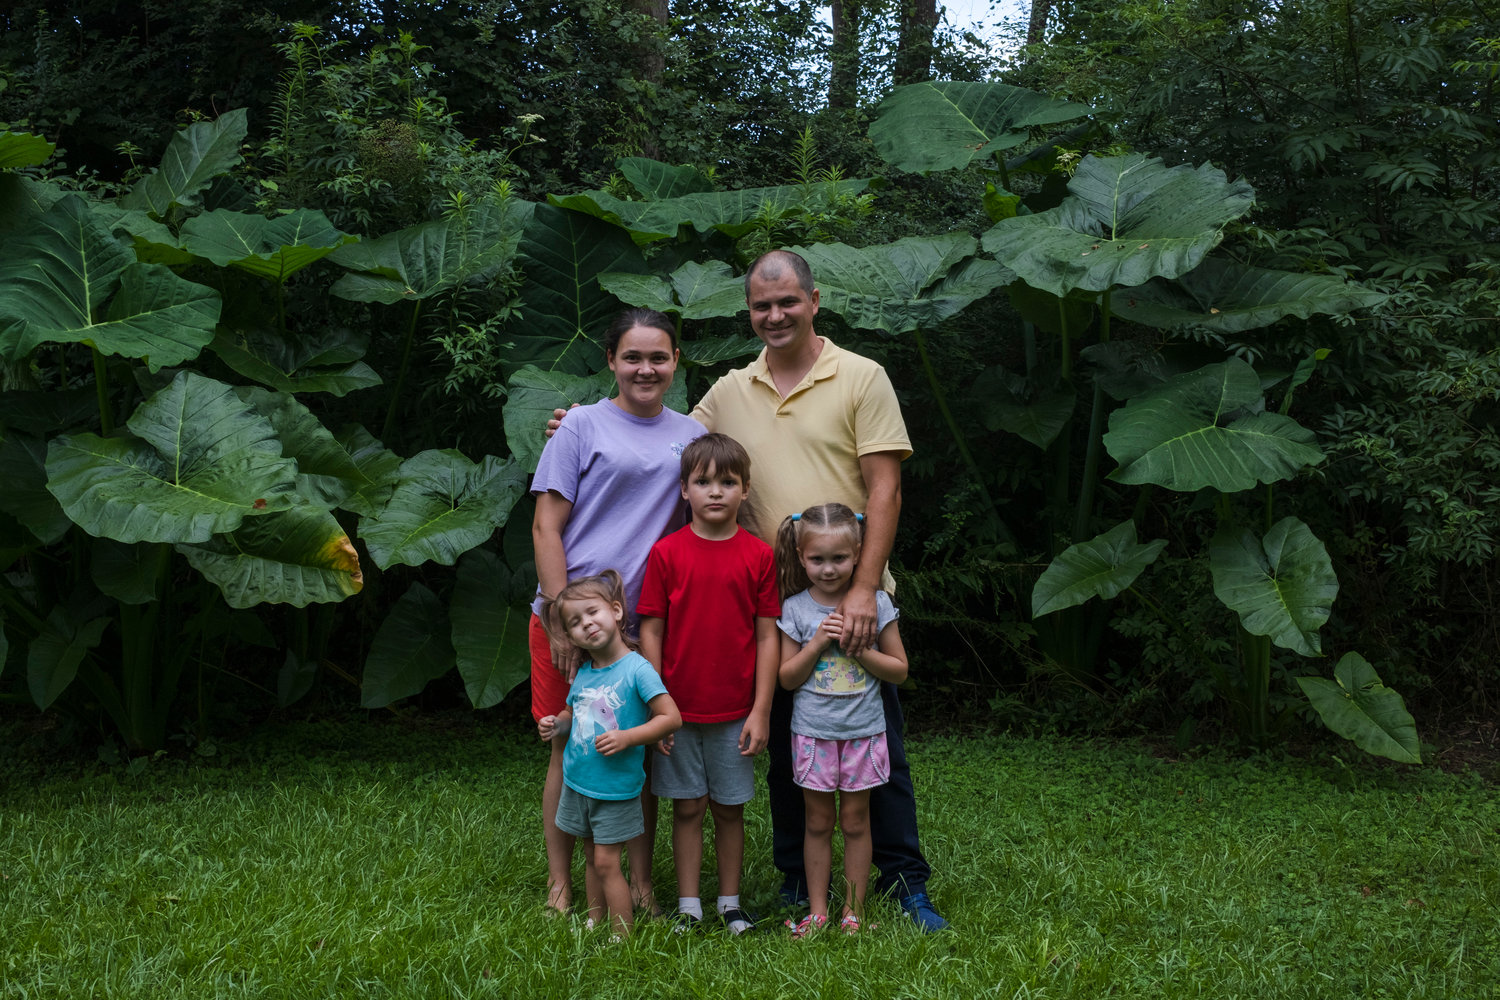 The Krokhmal family, new Robertsdale residents, in the backyard of the home they are staying in until they can find a rental. From left to right, parents Ira and Vitalii and children Victoria, 3, Masha, 6, and Oleg, 8.